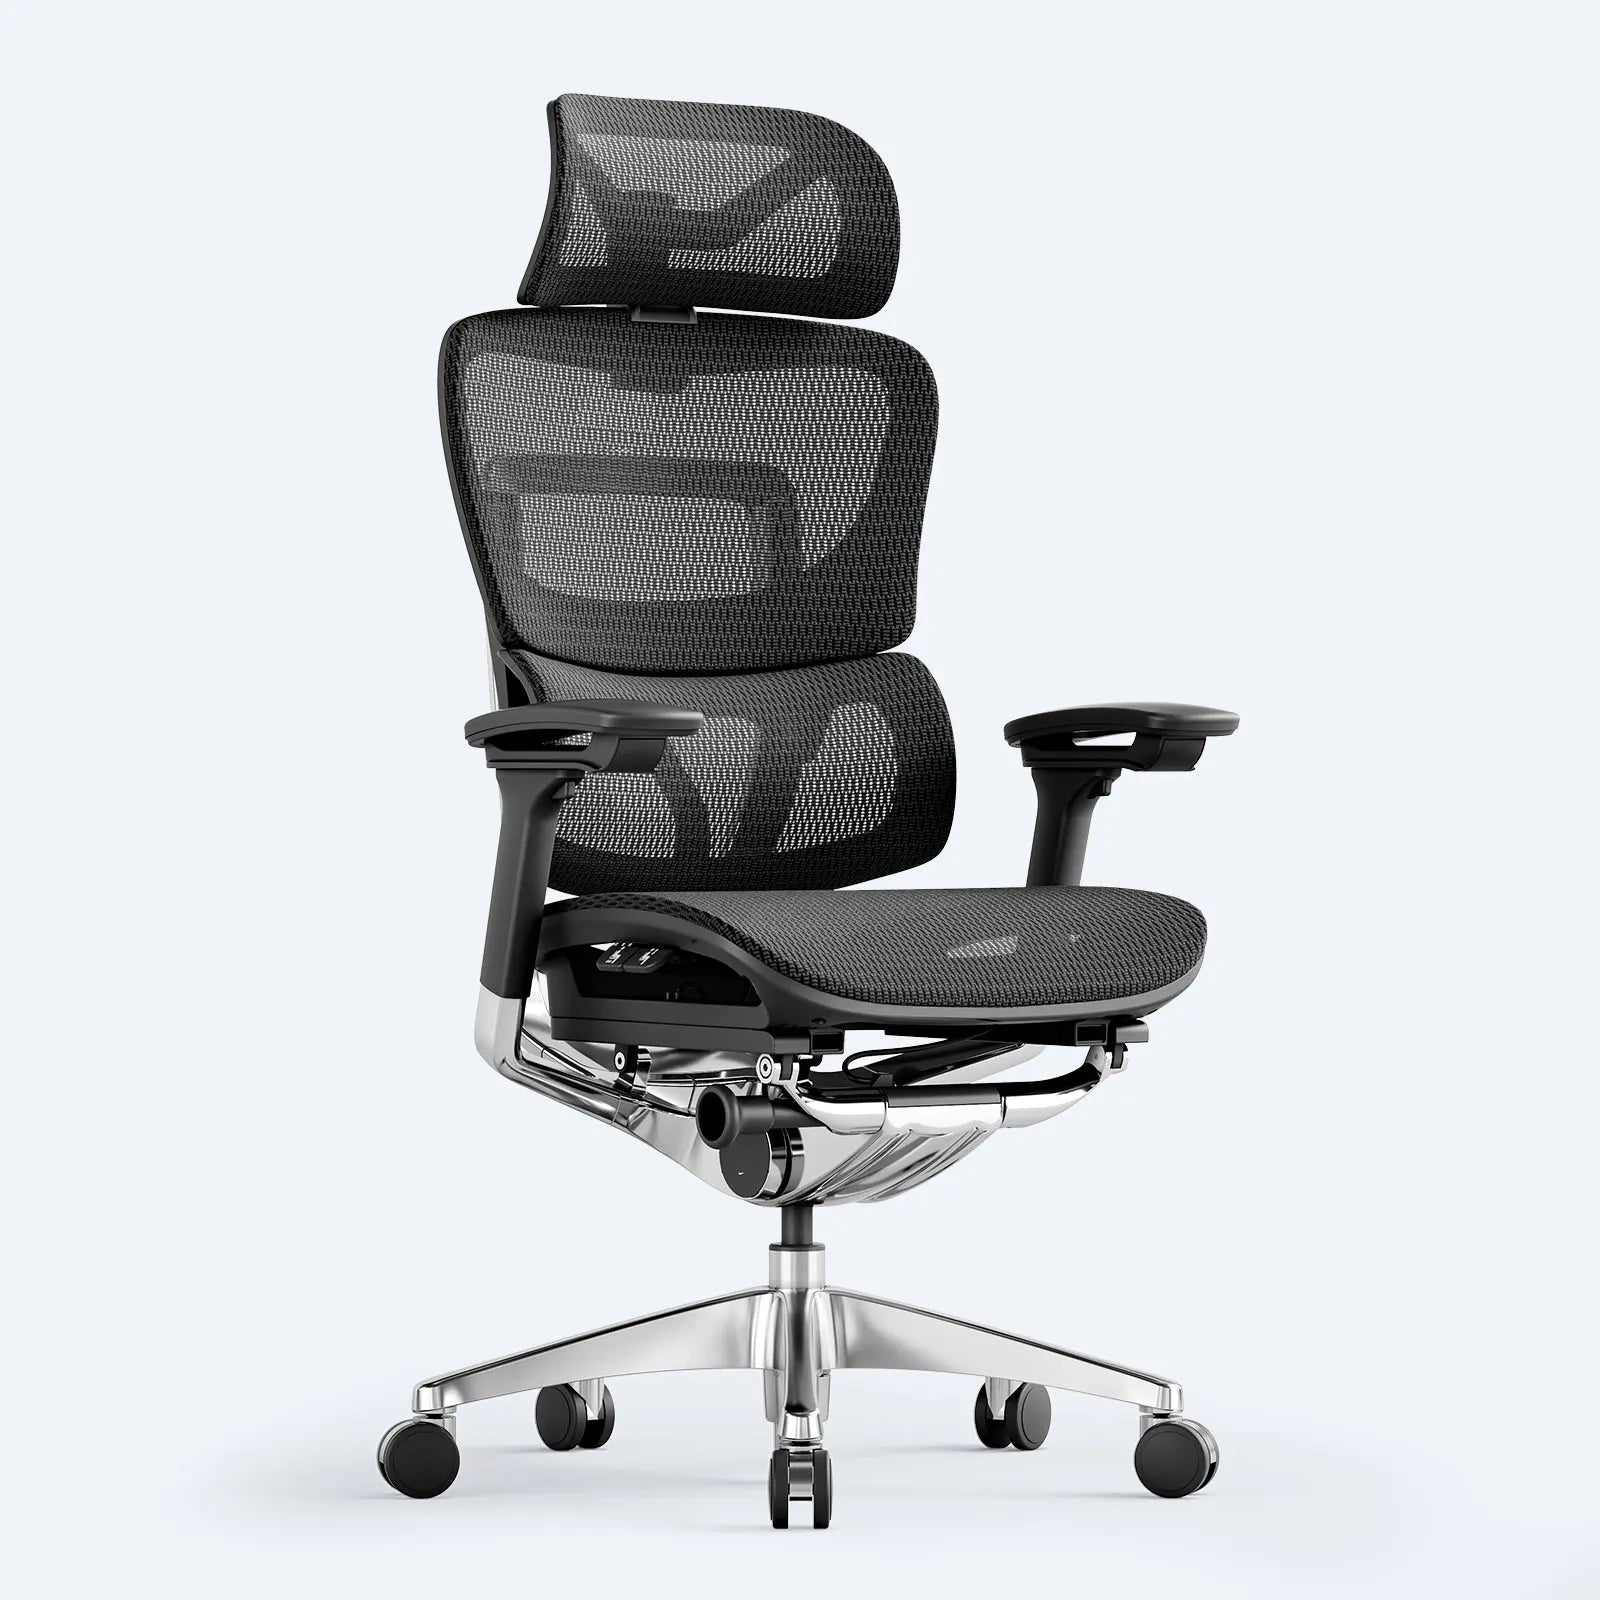 Best ergonomic office chair with leg support – OdinLake